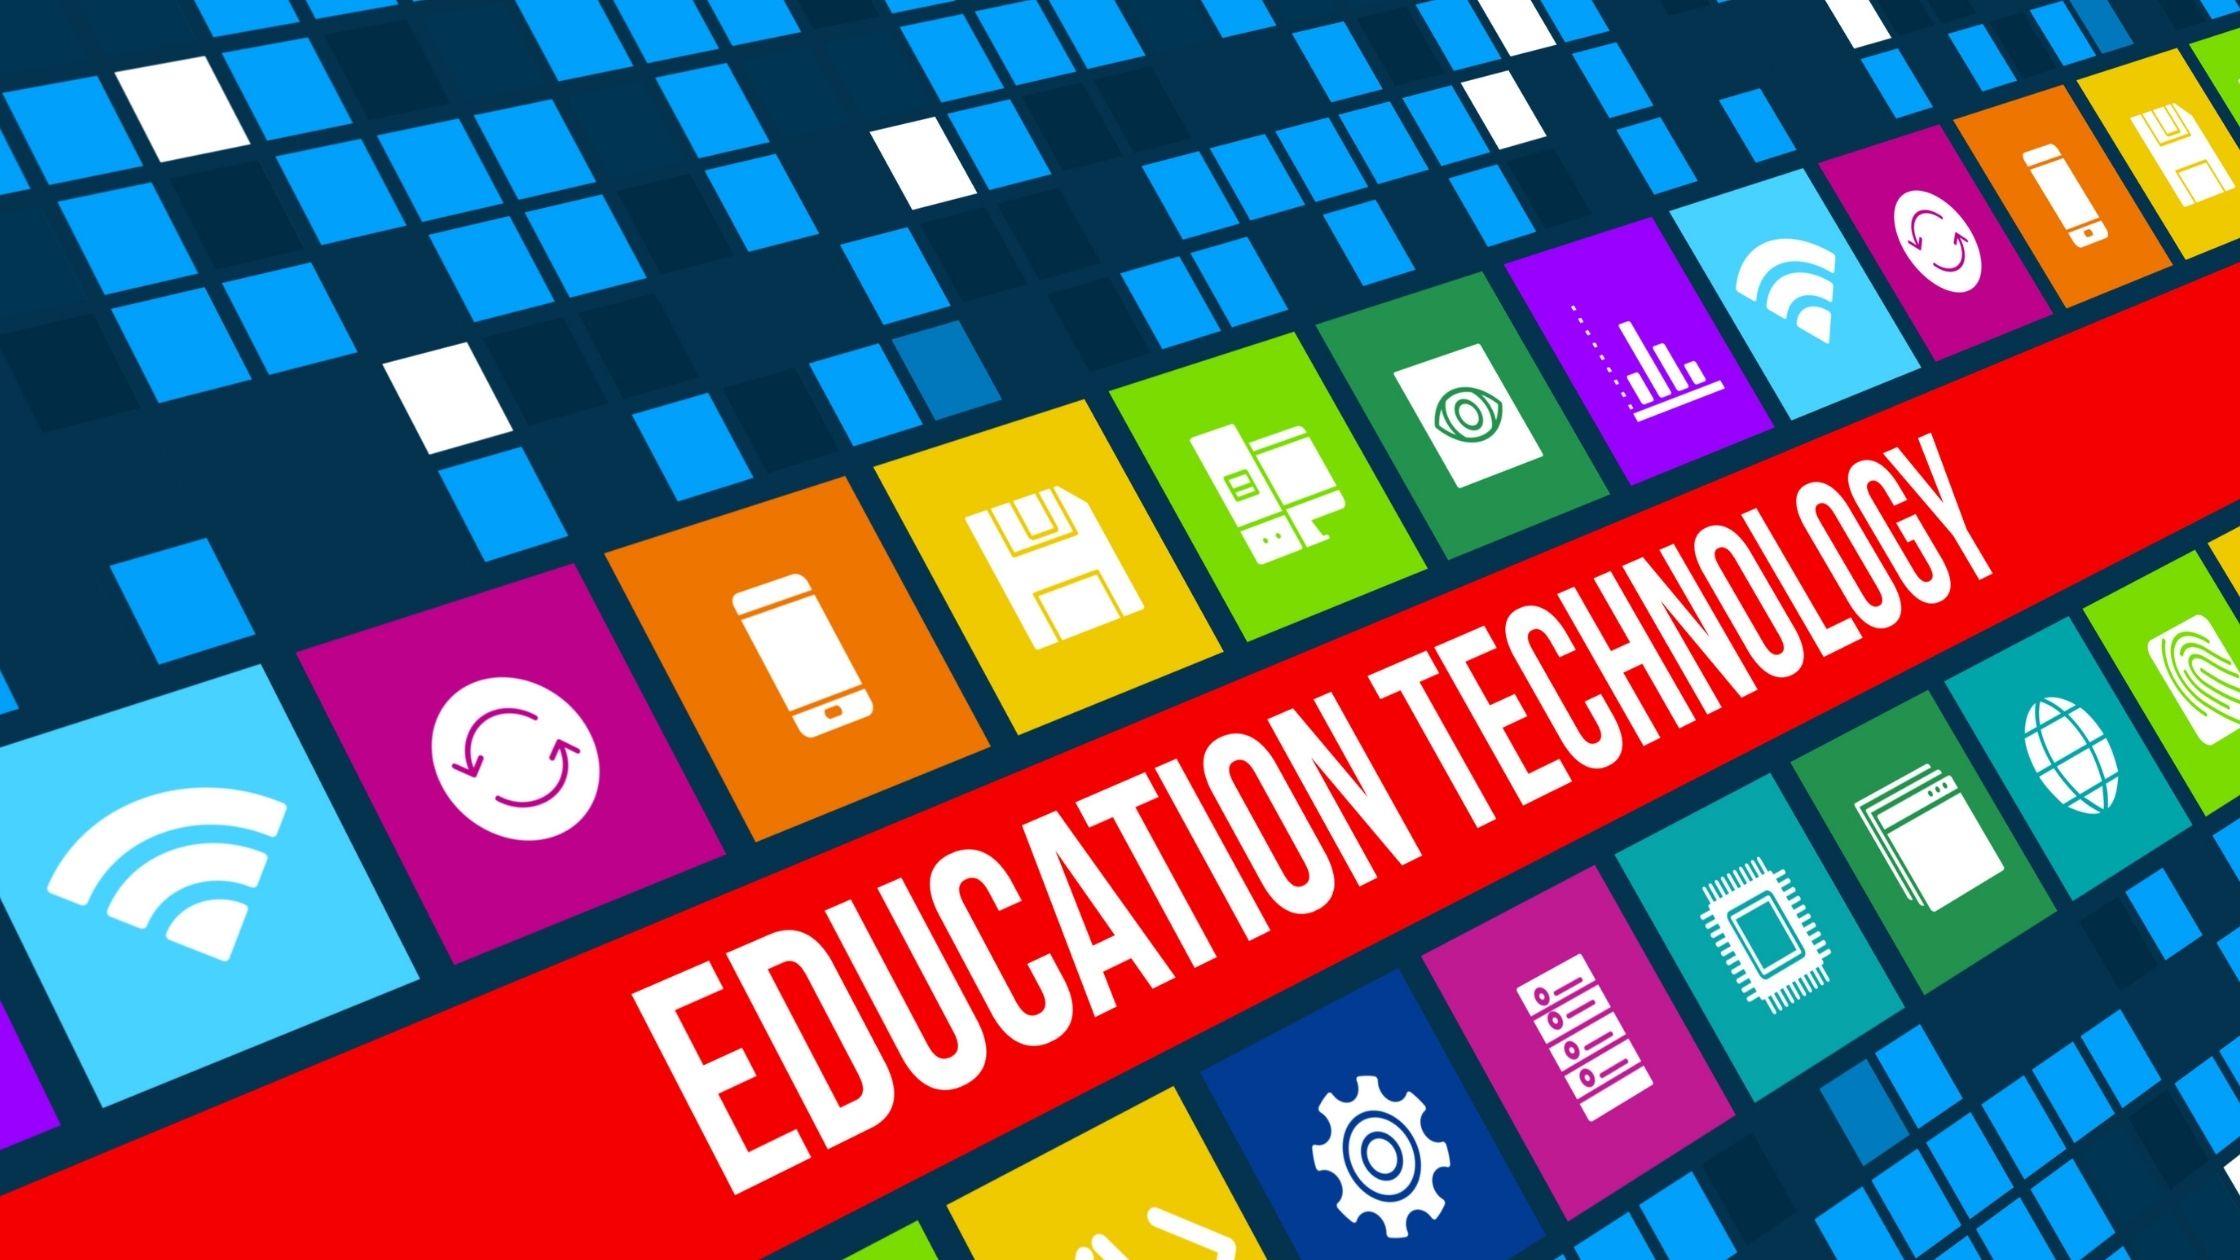 technology in education companies